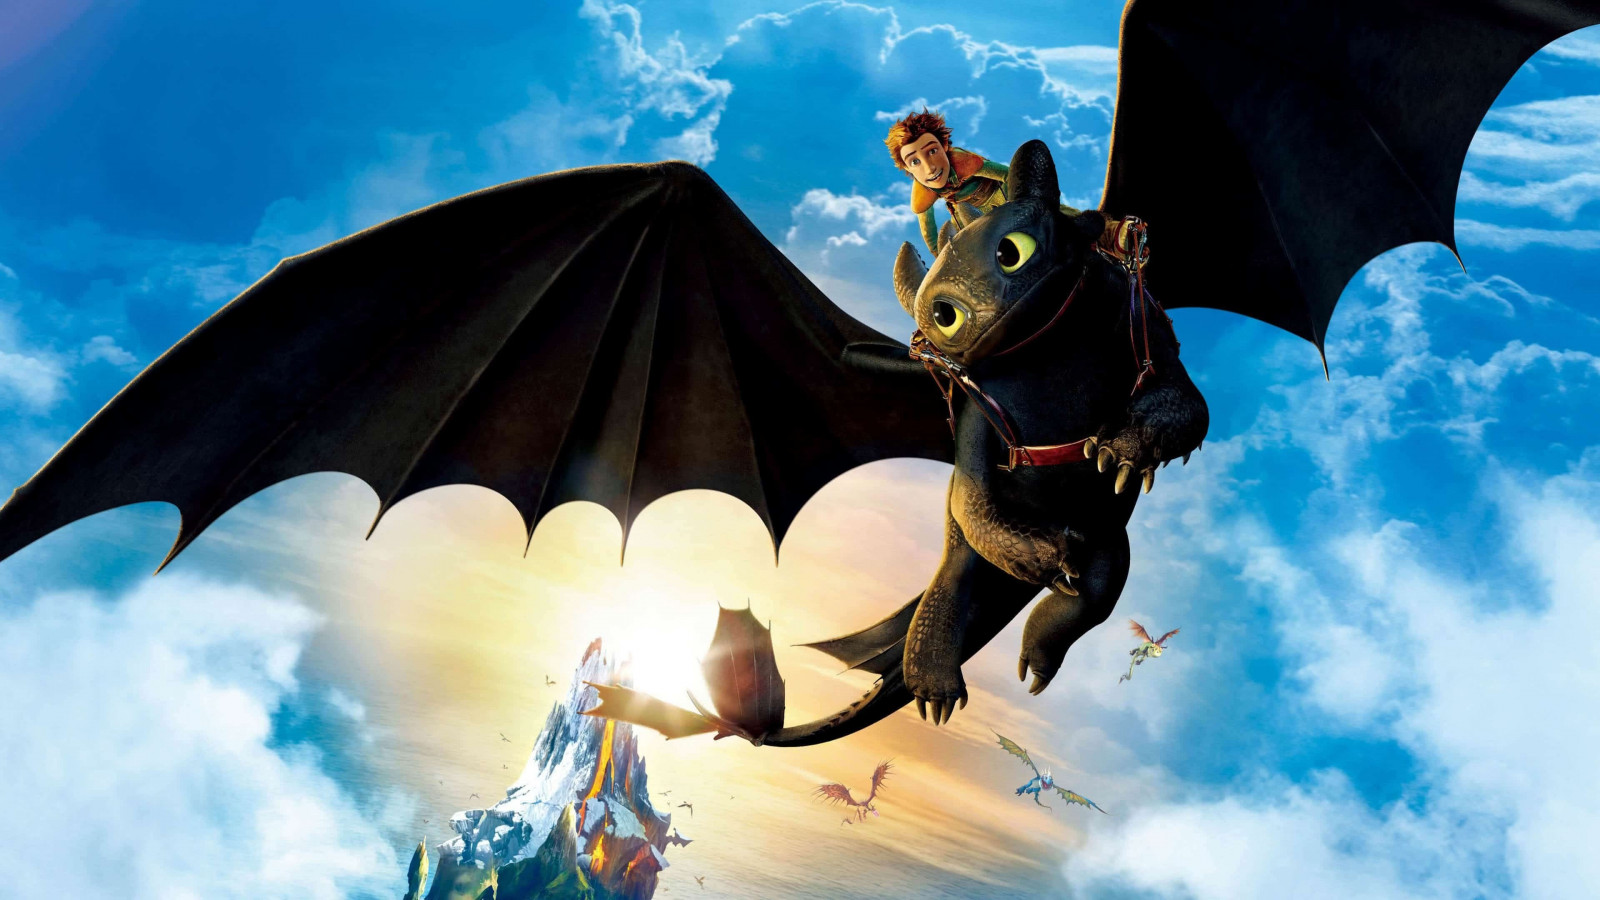 How to Train Your Dragon: The Hidden World wallpaper 1600x900